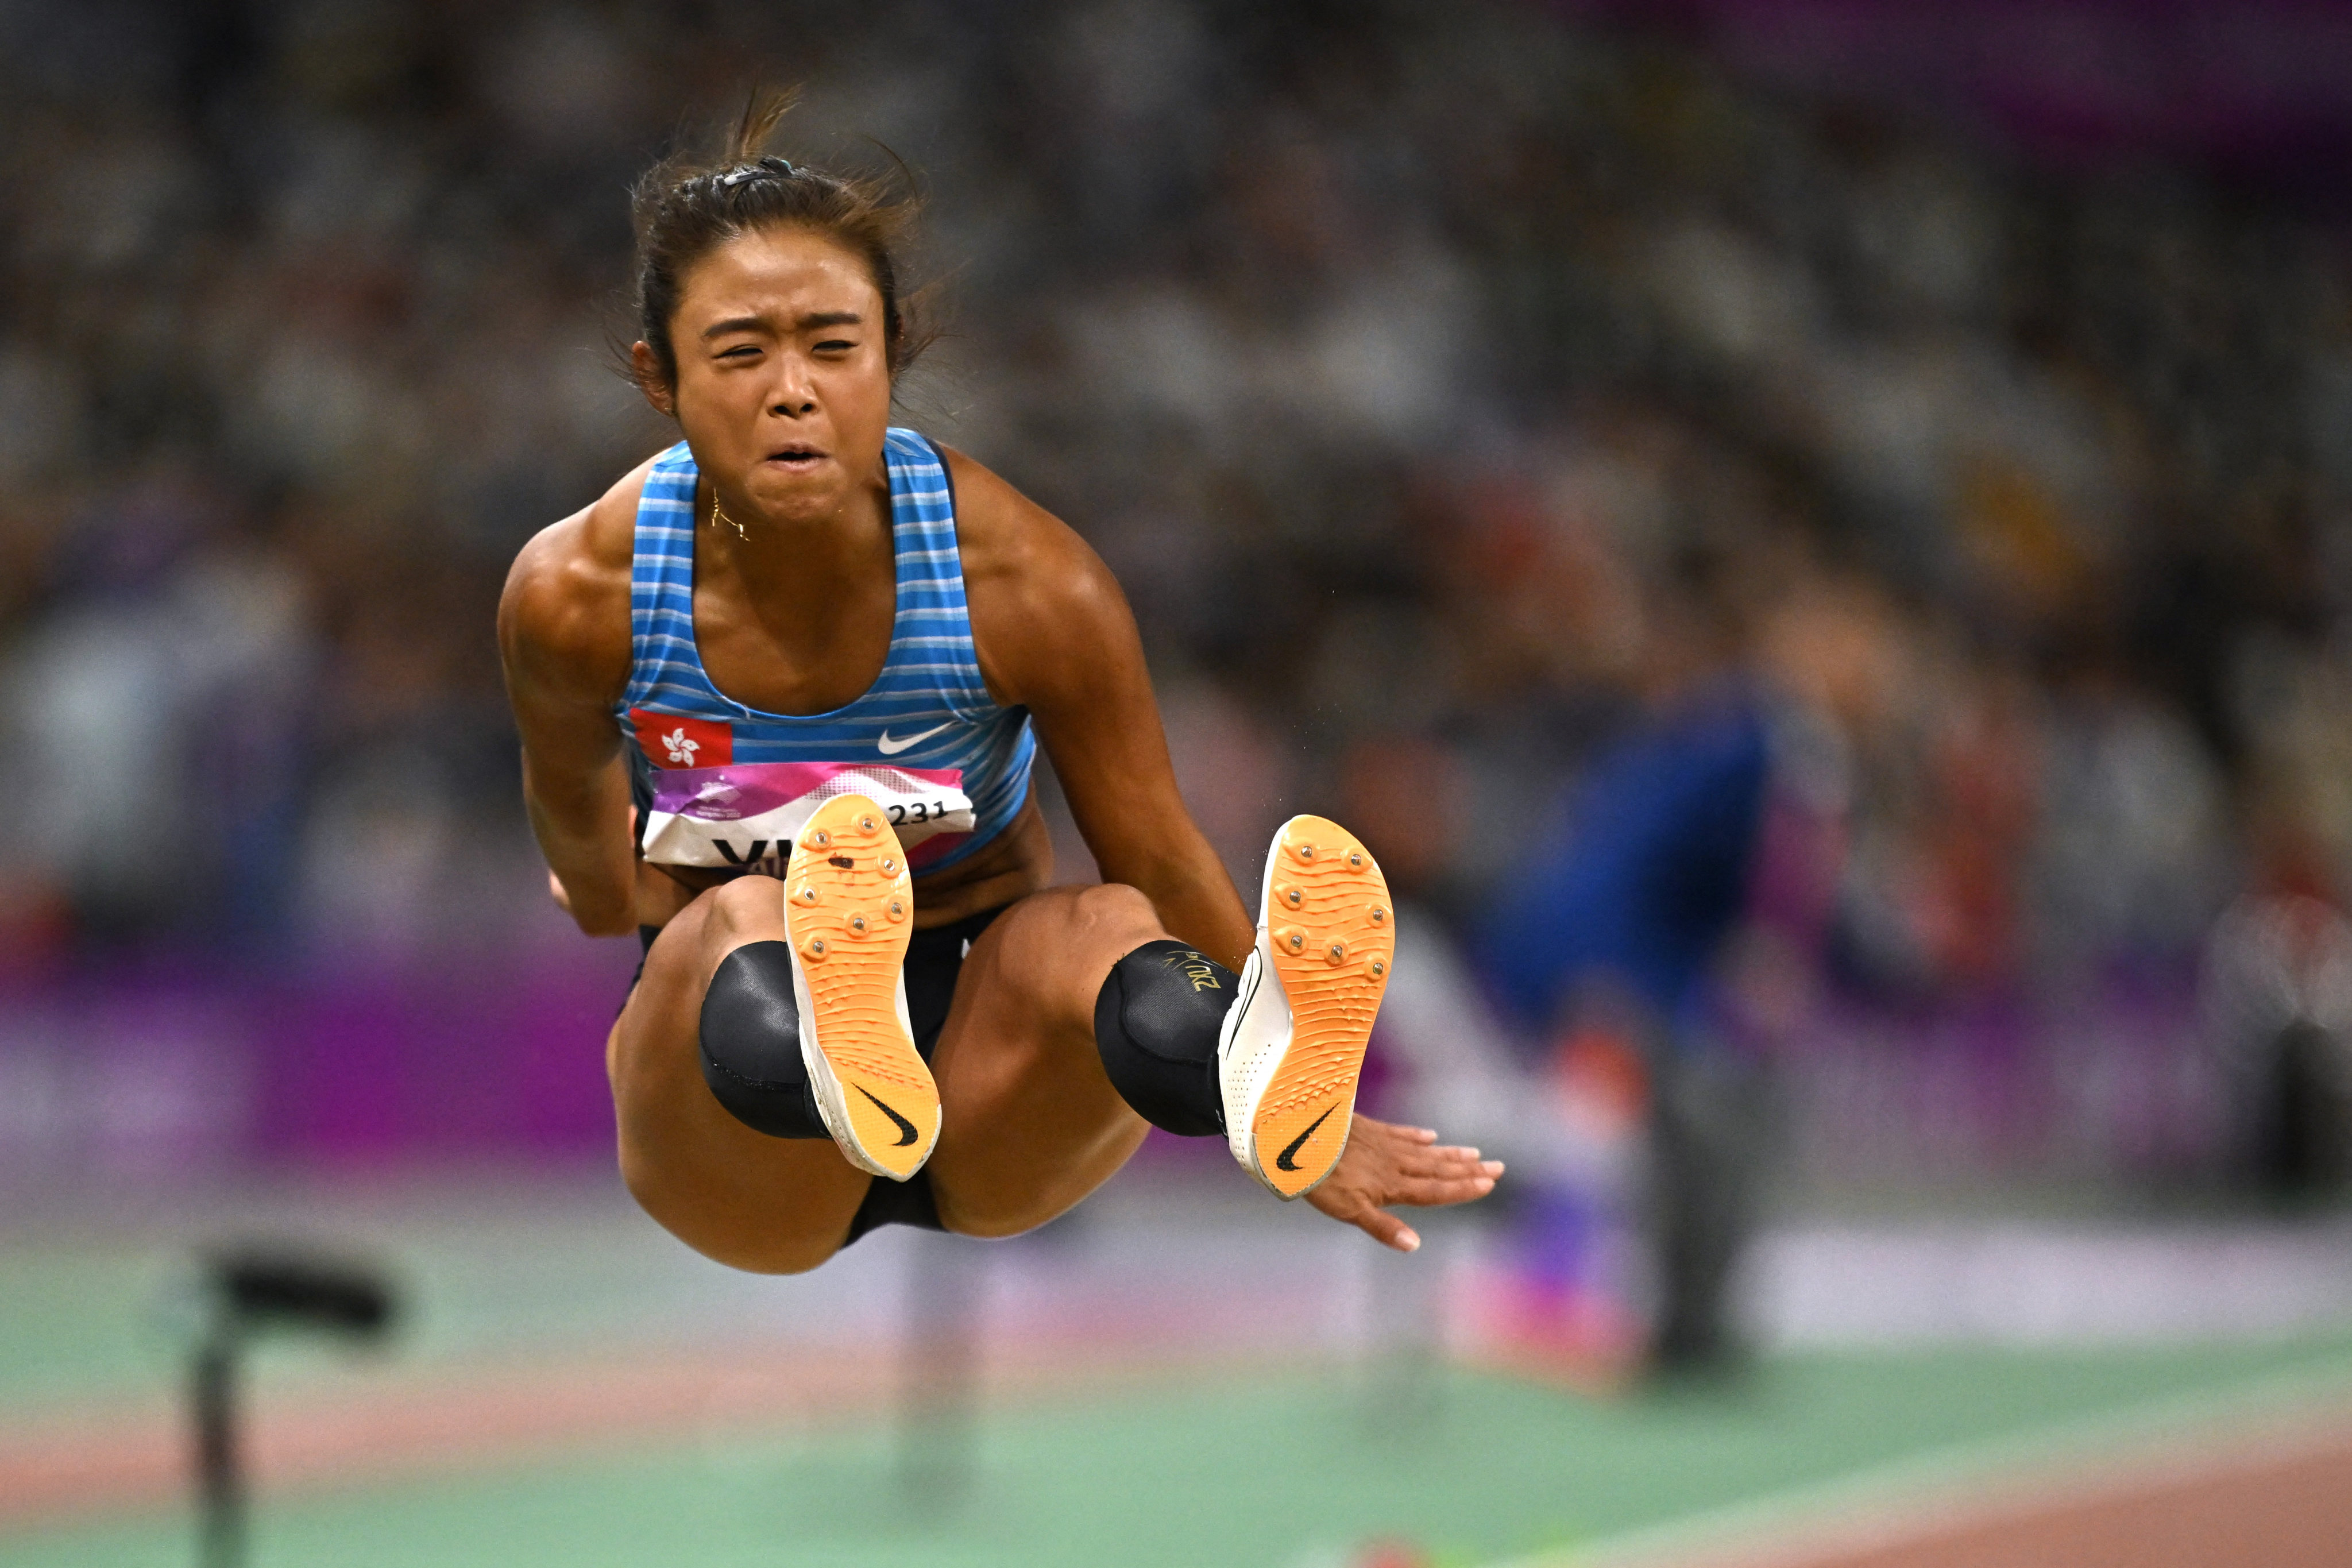 Hong Kong’s Tiffany Yue in action during the women’s long jump final. Photo: Reuters